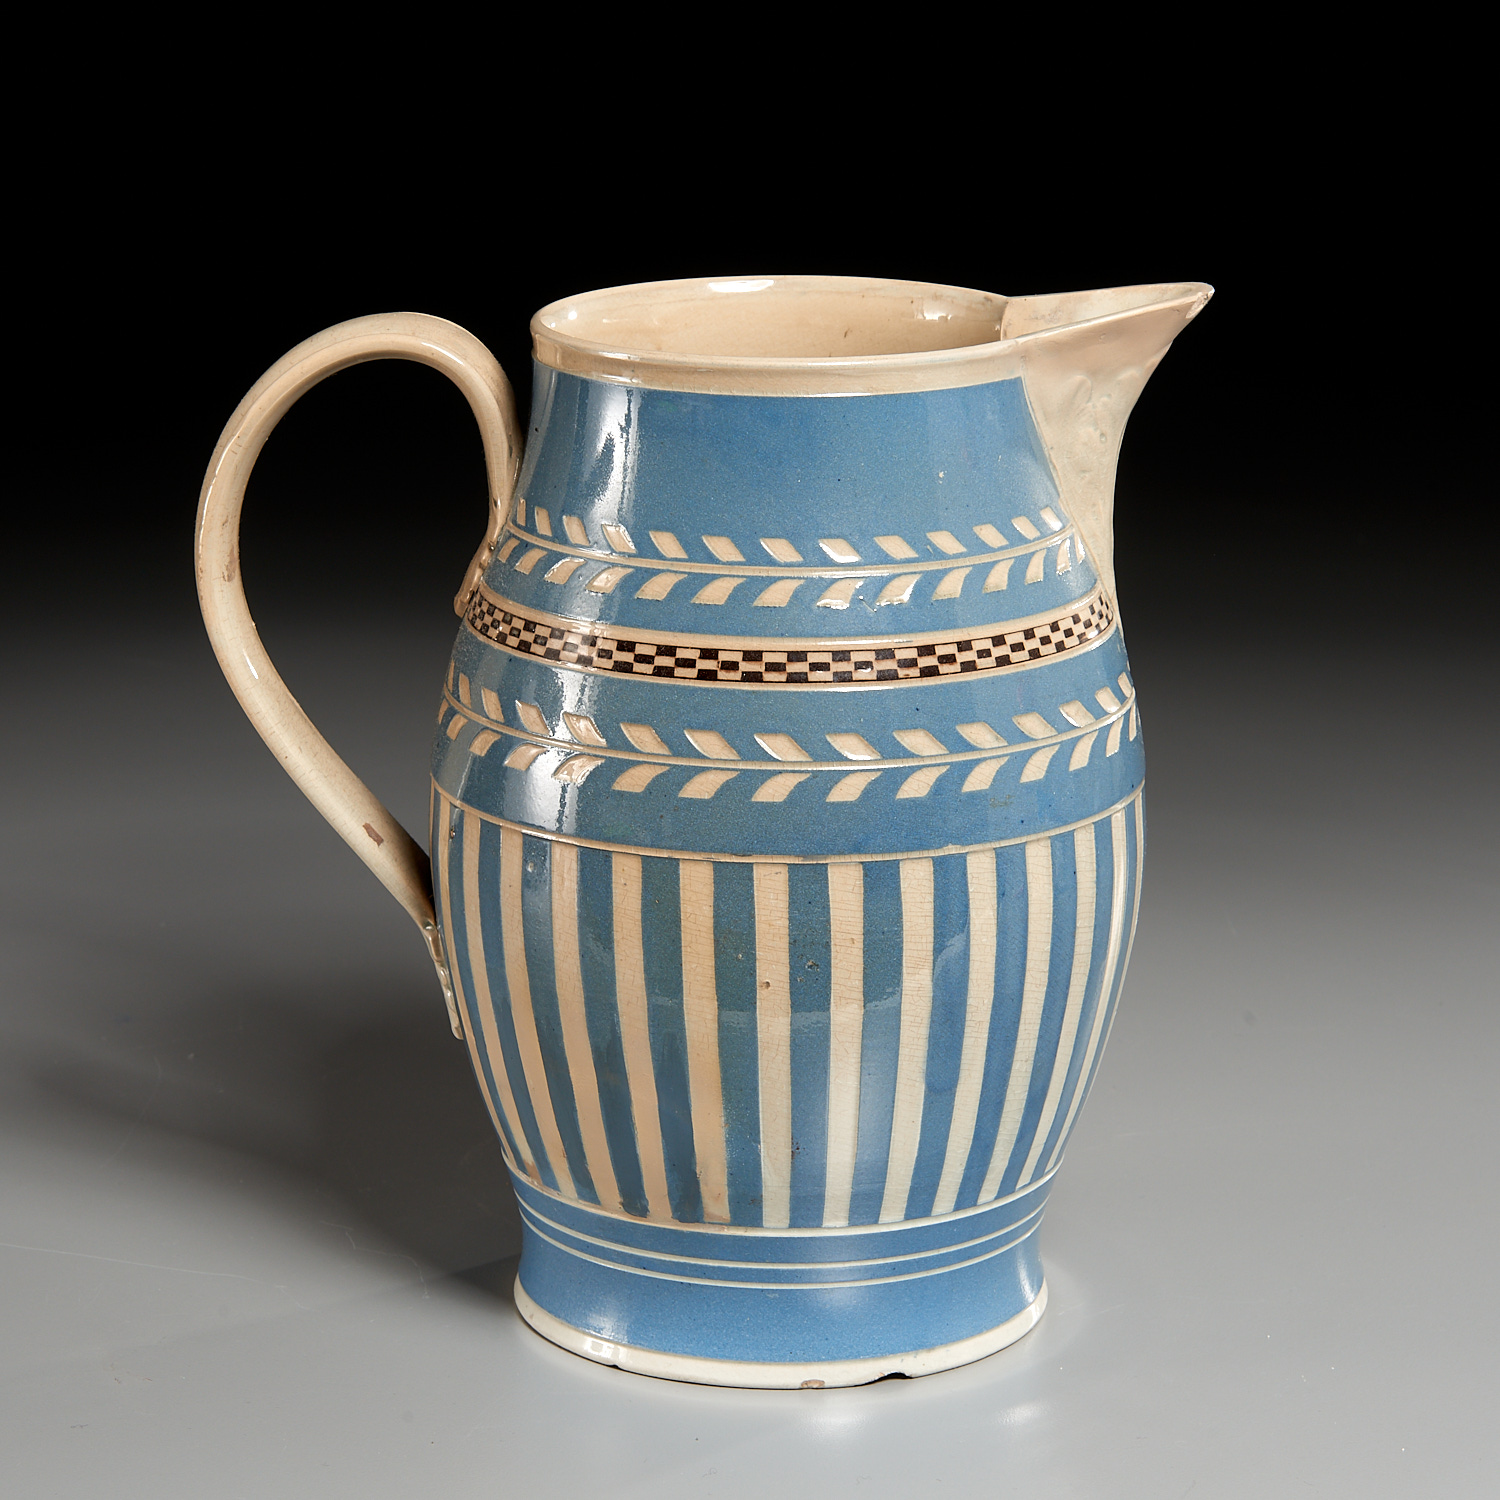 ENGLISH MOCHAWARE PITCHER Early 19th